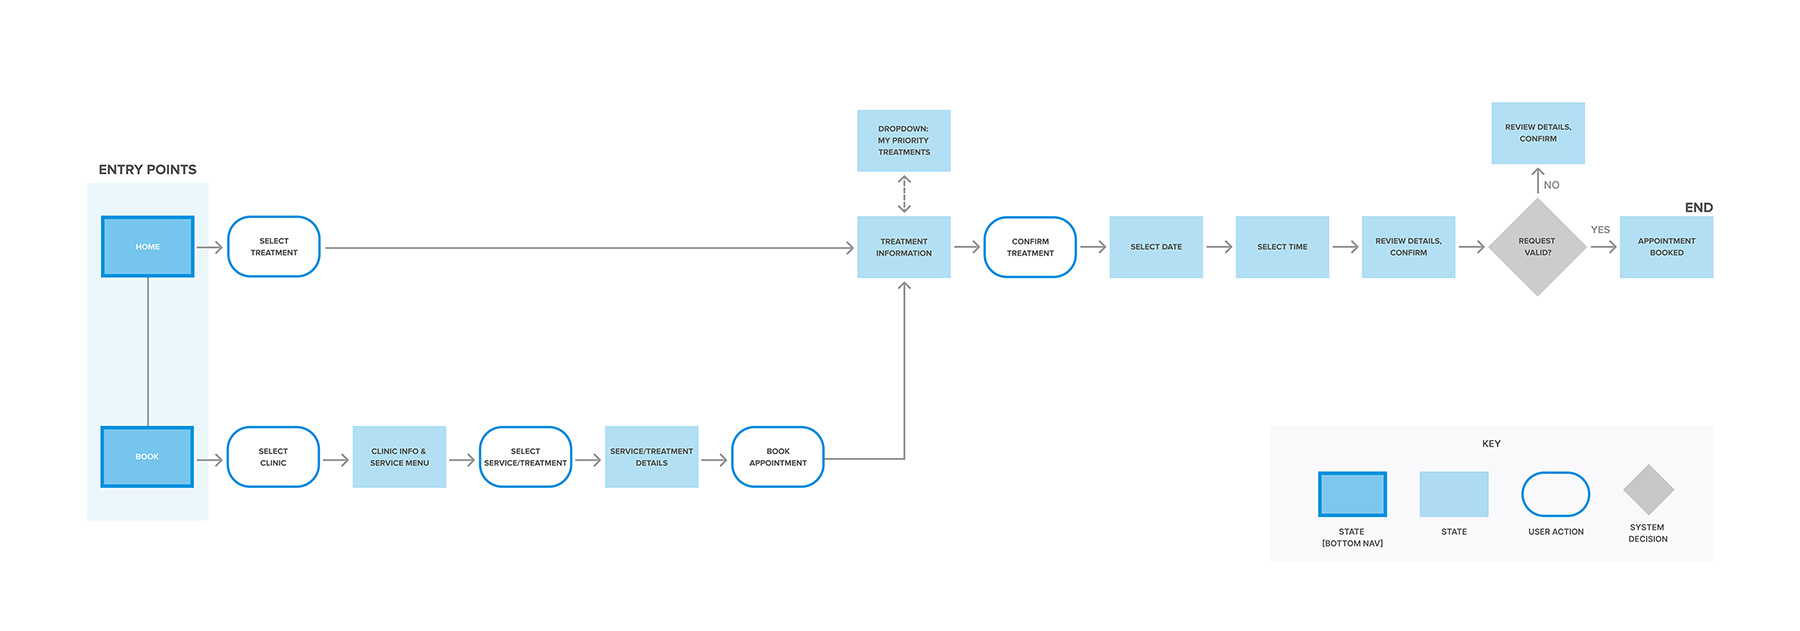 Citrus app user flow diagram for booking an appointment